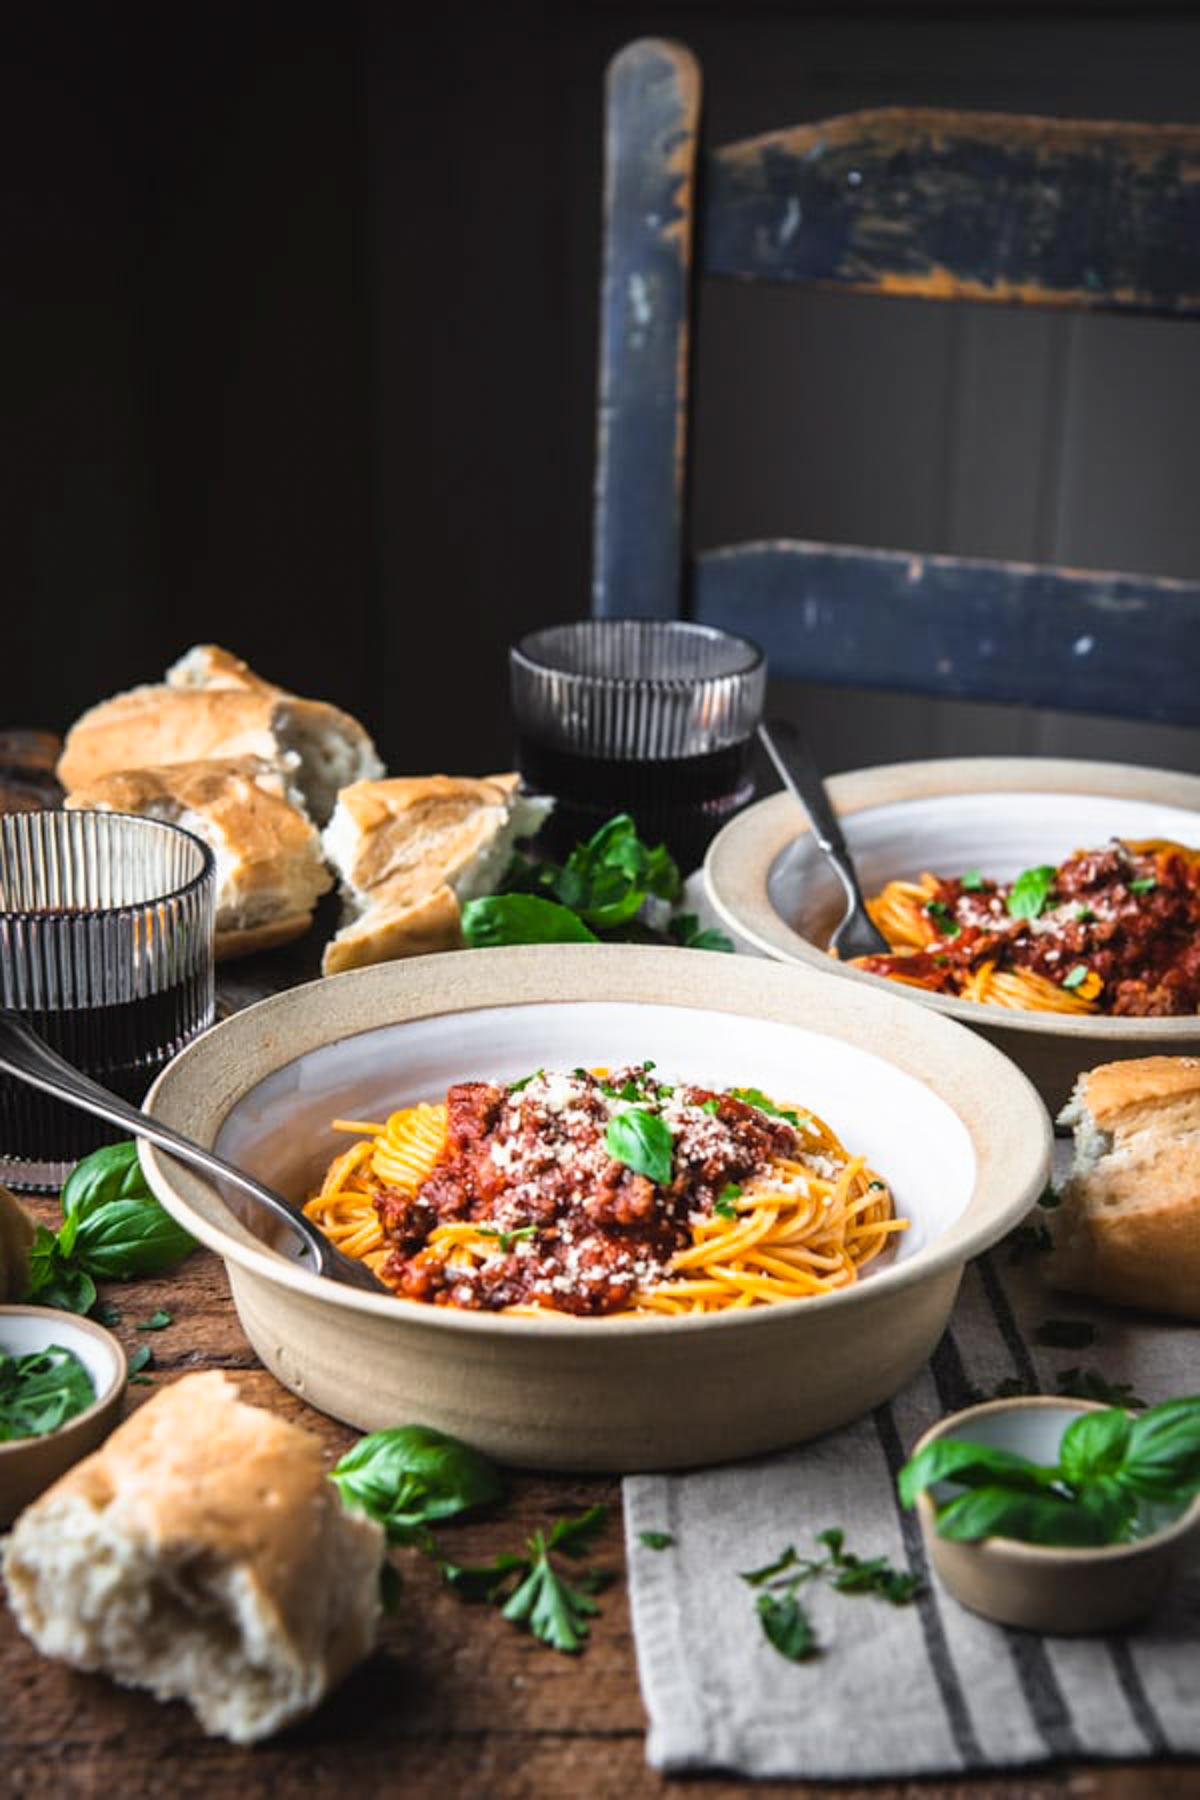 Bowls of homemade spaghetti served at a table surrounded by pieces of french bread, basil leaves, and a glass of red wine.